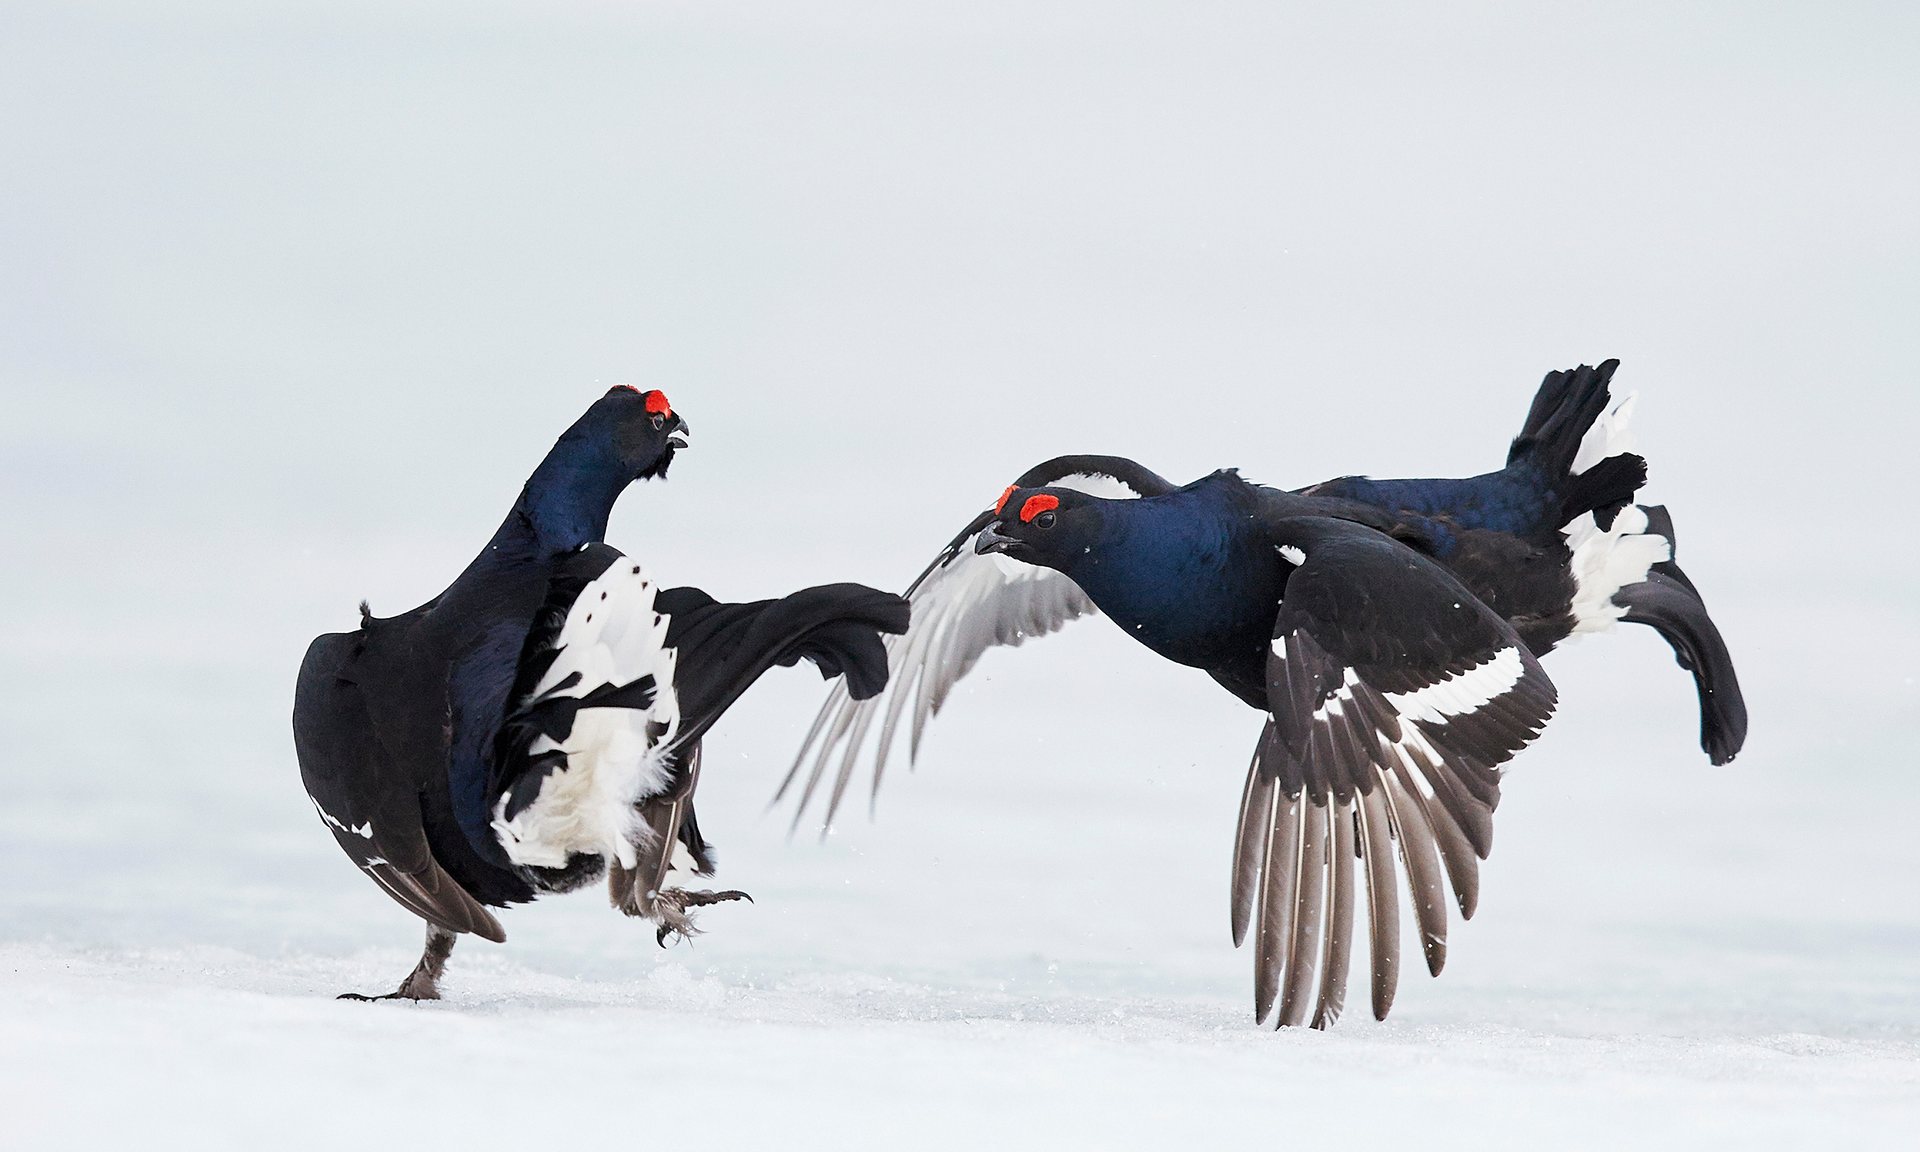 Black grouse fight in Vaala, Finland. The country is committed to protecting biodiversity under its implementation of the sustainable development goals. Photograph: Markus Varesvuo/NPL/Barcroft